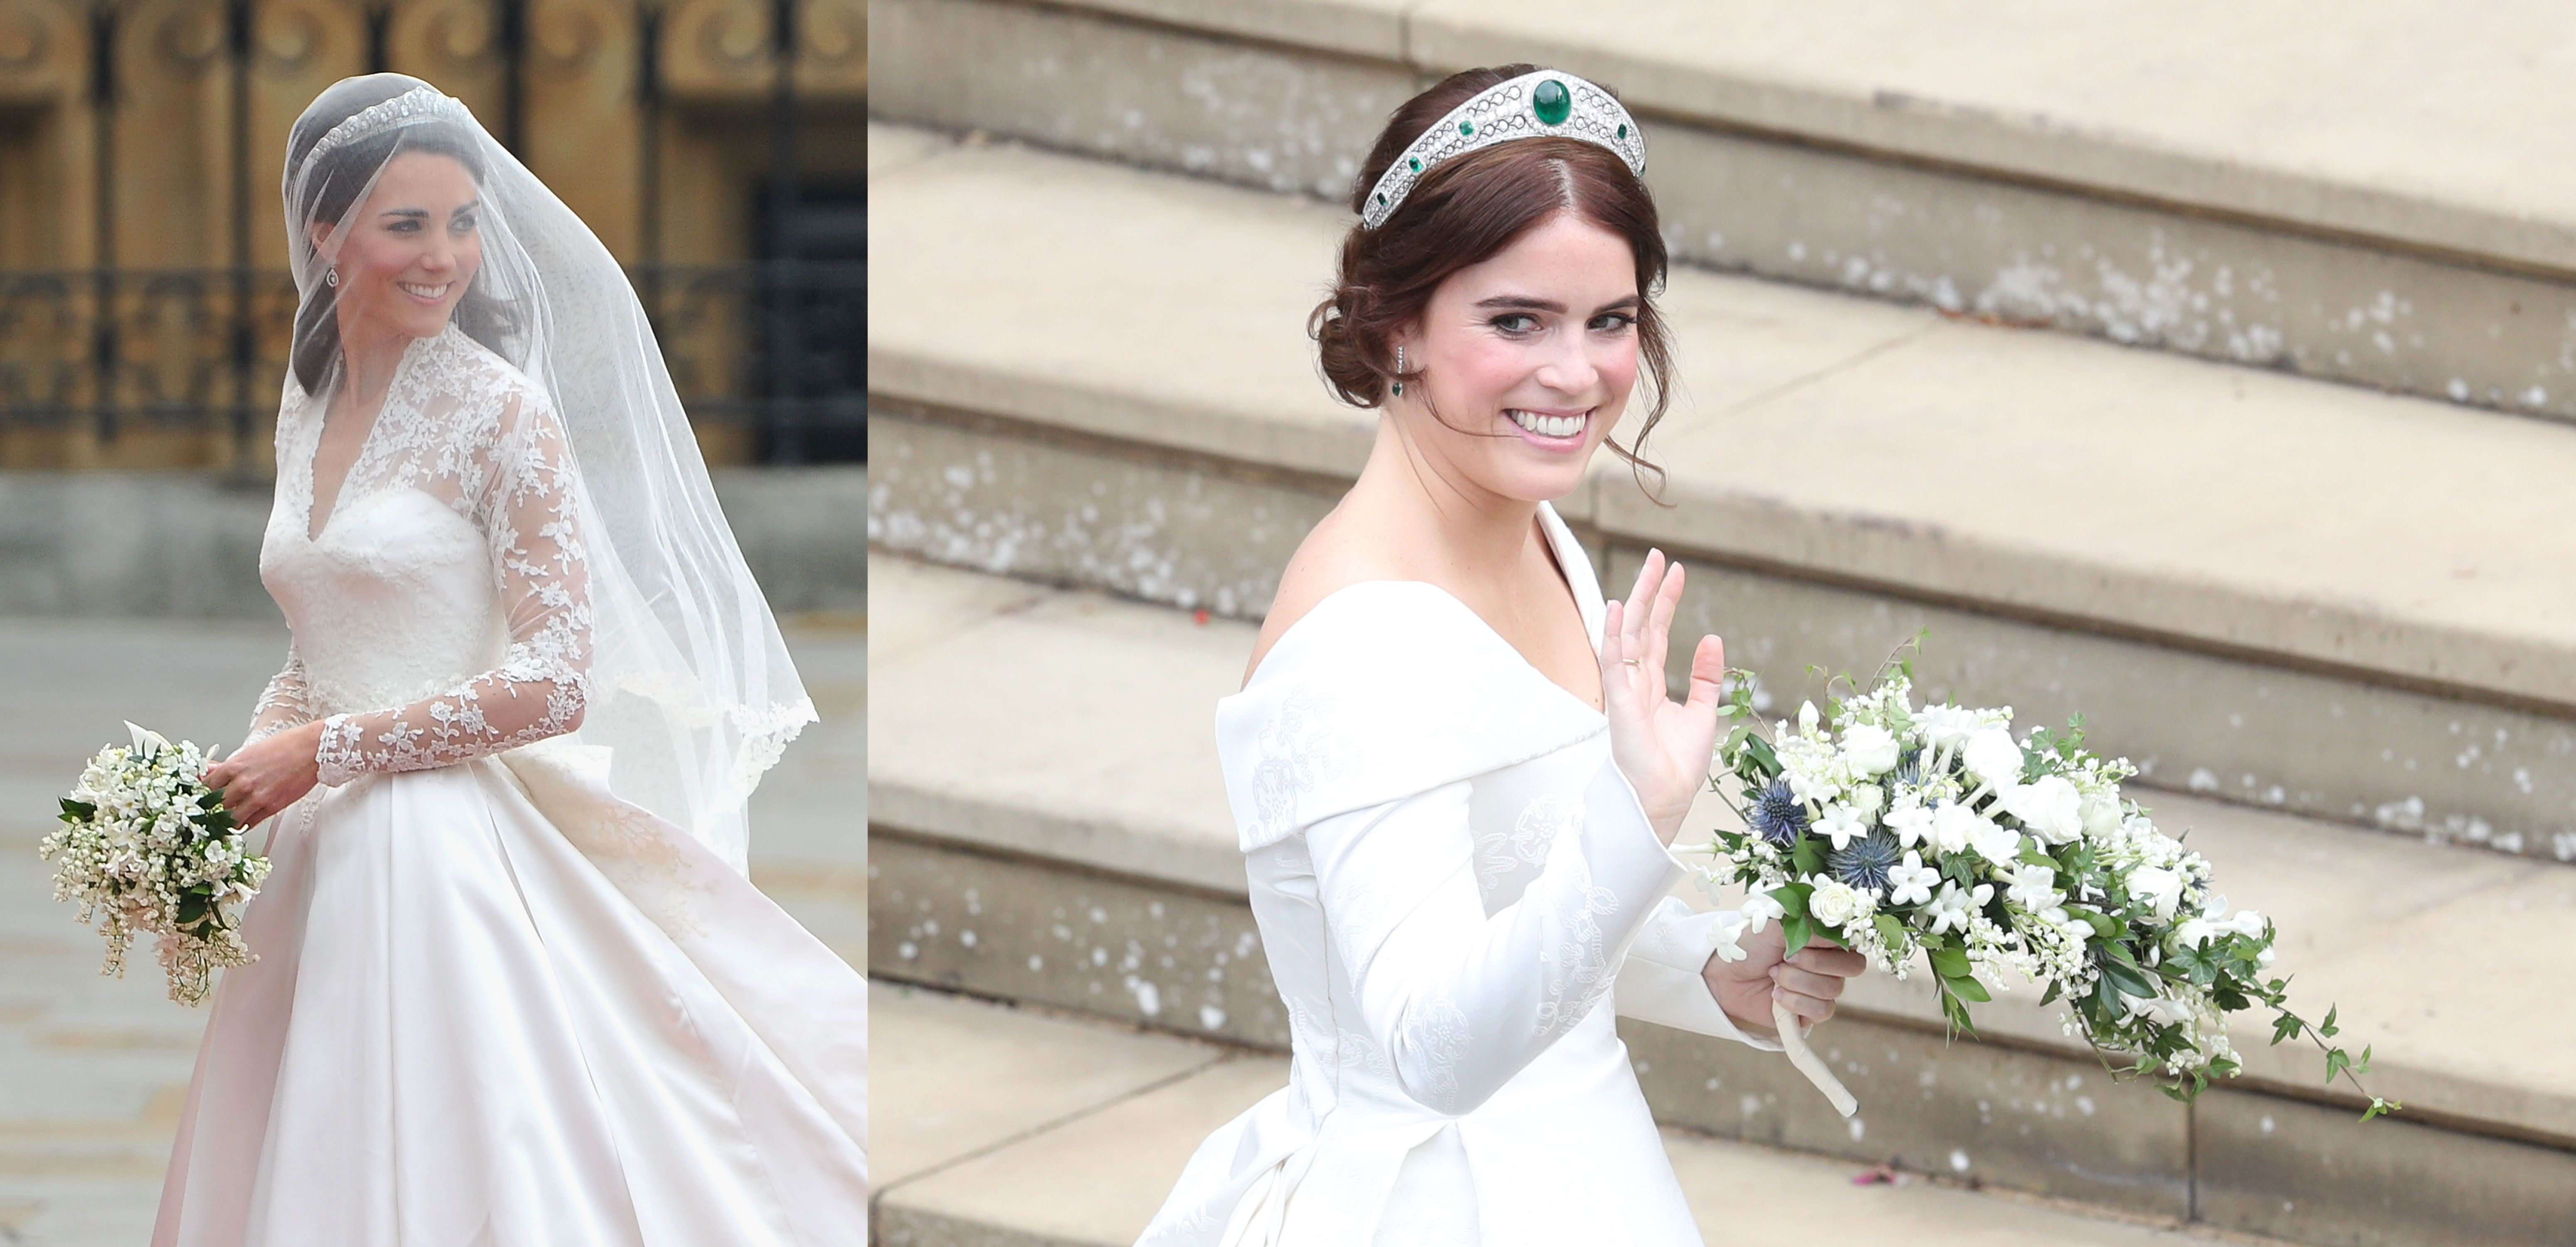 Queen Victoria's wedding gown offers hints on Kate Middleton's